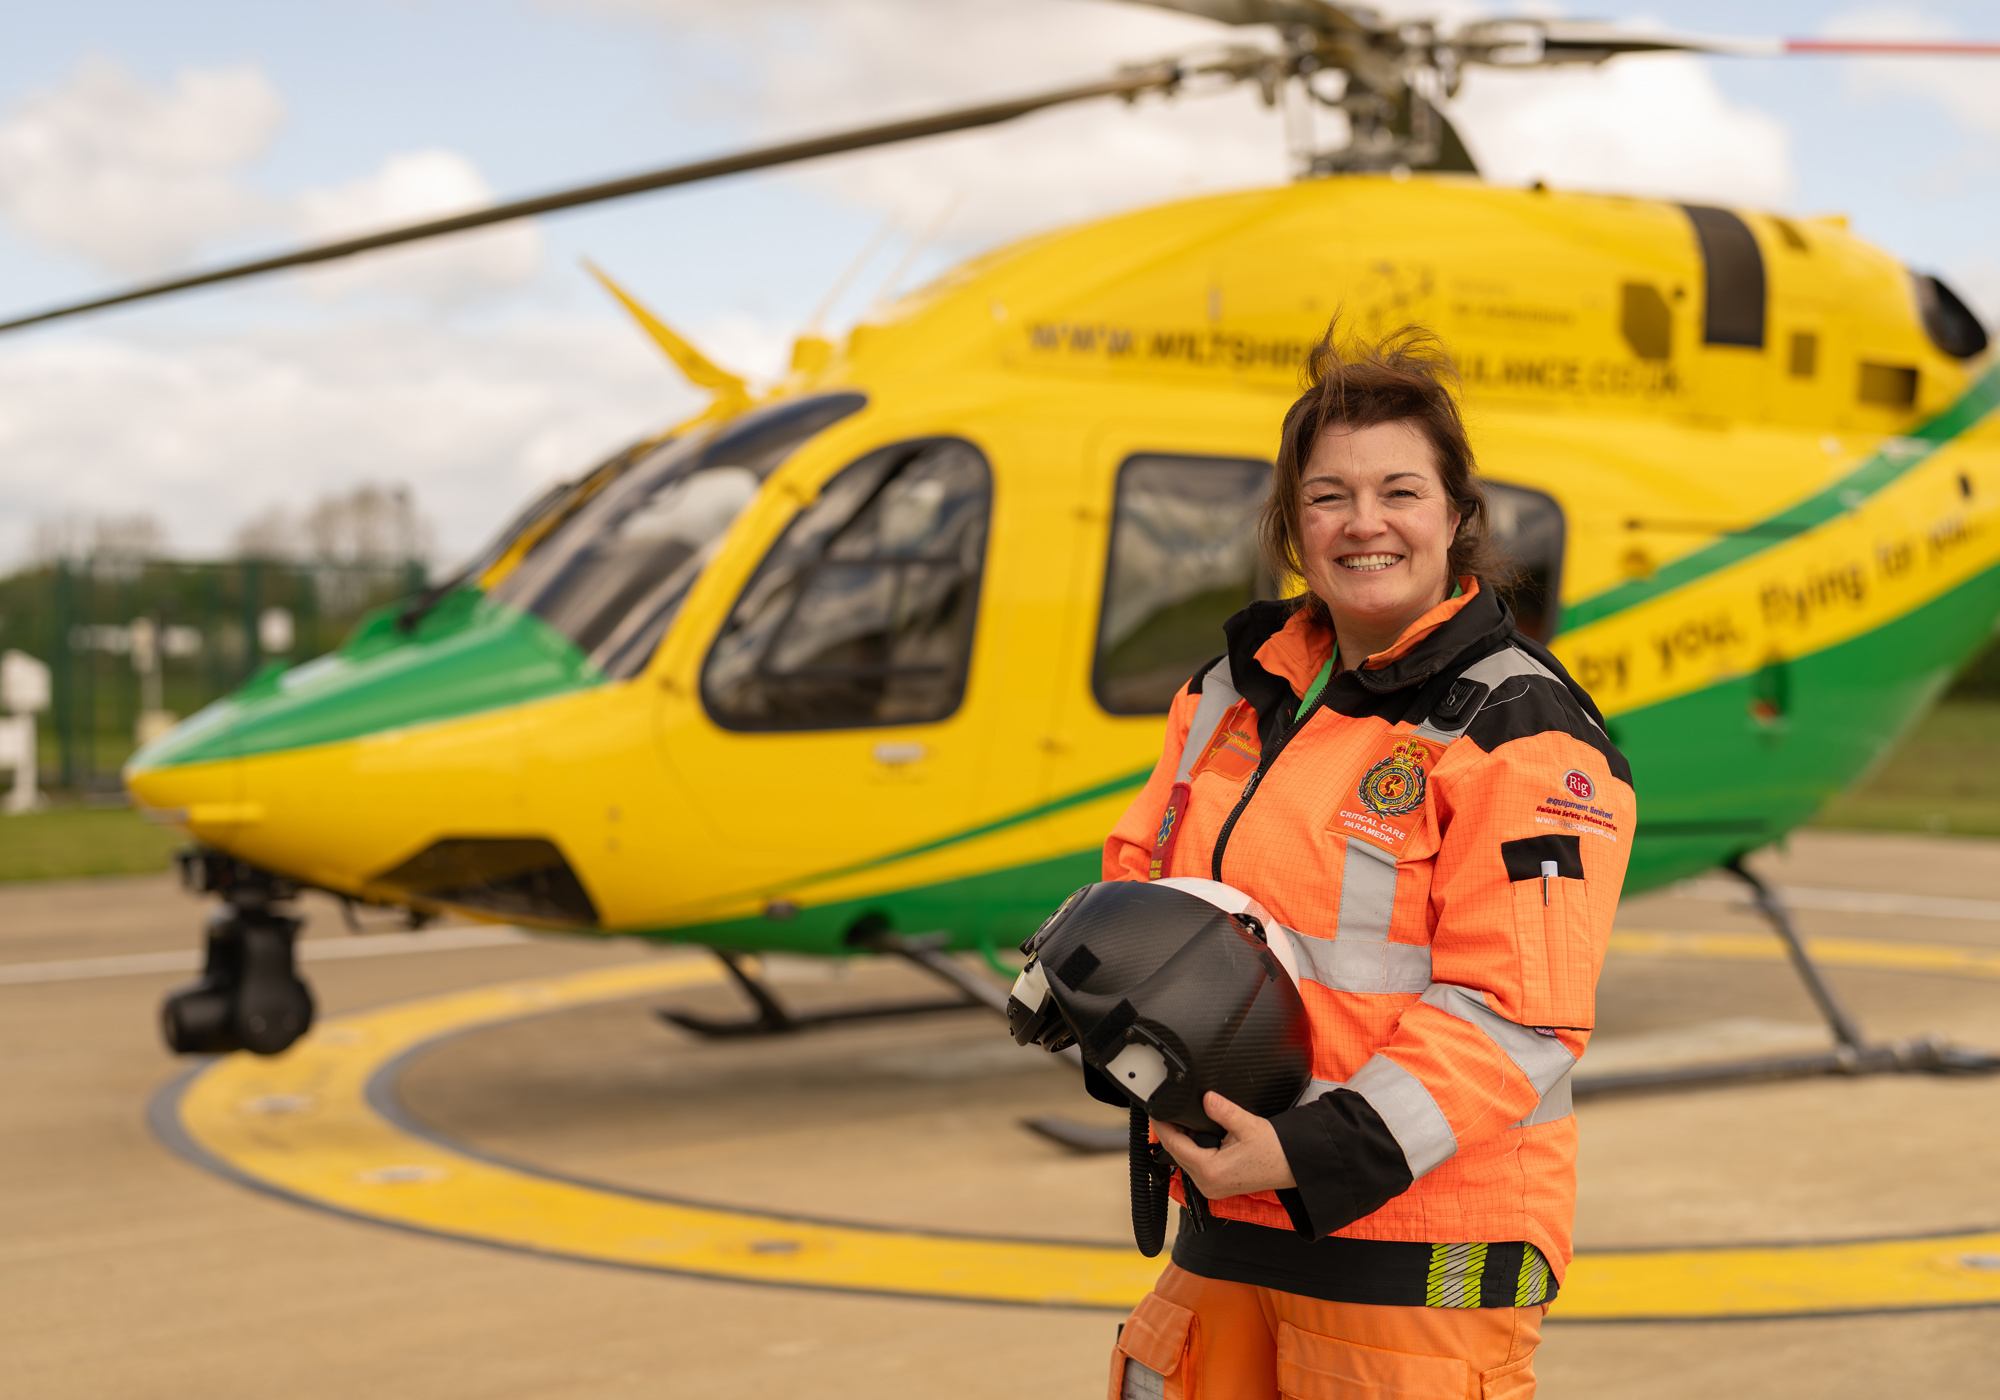 A photo of a female critical care paramedic holding a helmet, standing in front of a yellow and green helicopter